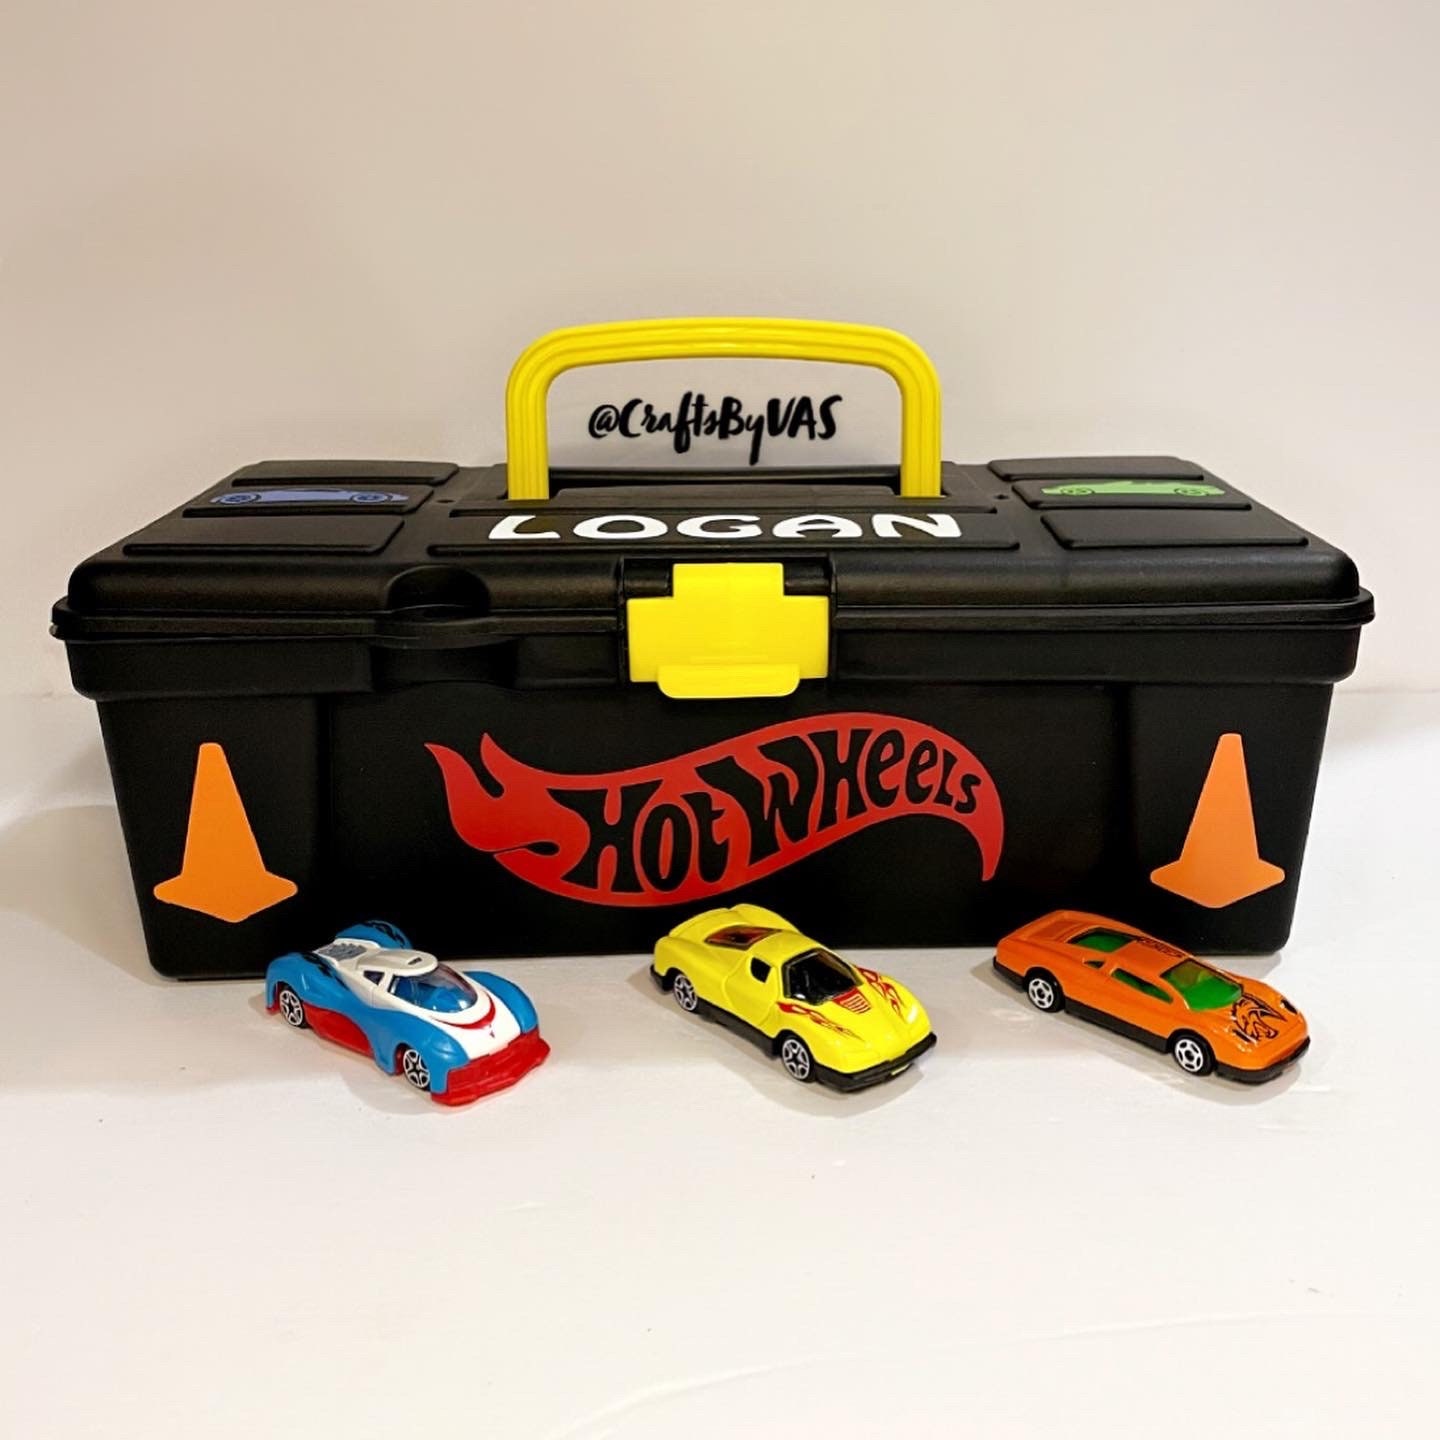 Carrying Storage Case for Hot Wheels 20 Cars Gift Pack, Organizer Display  Box for Hotwheels Toy